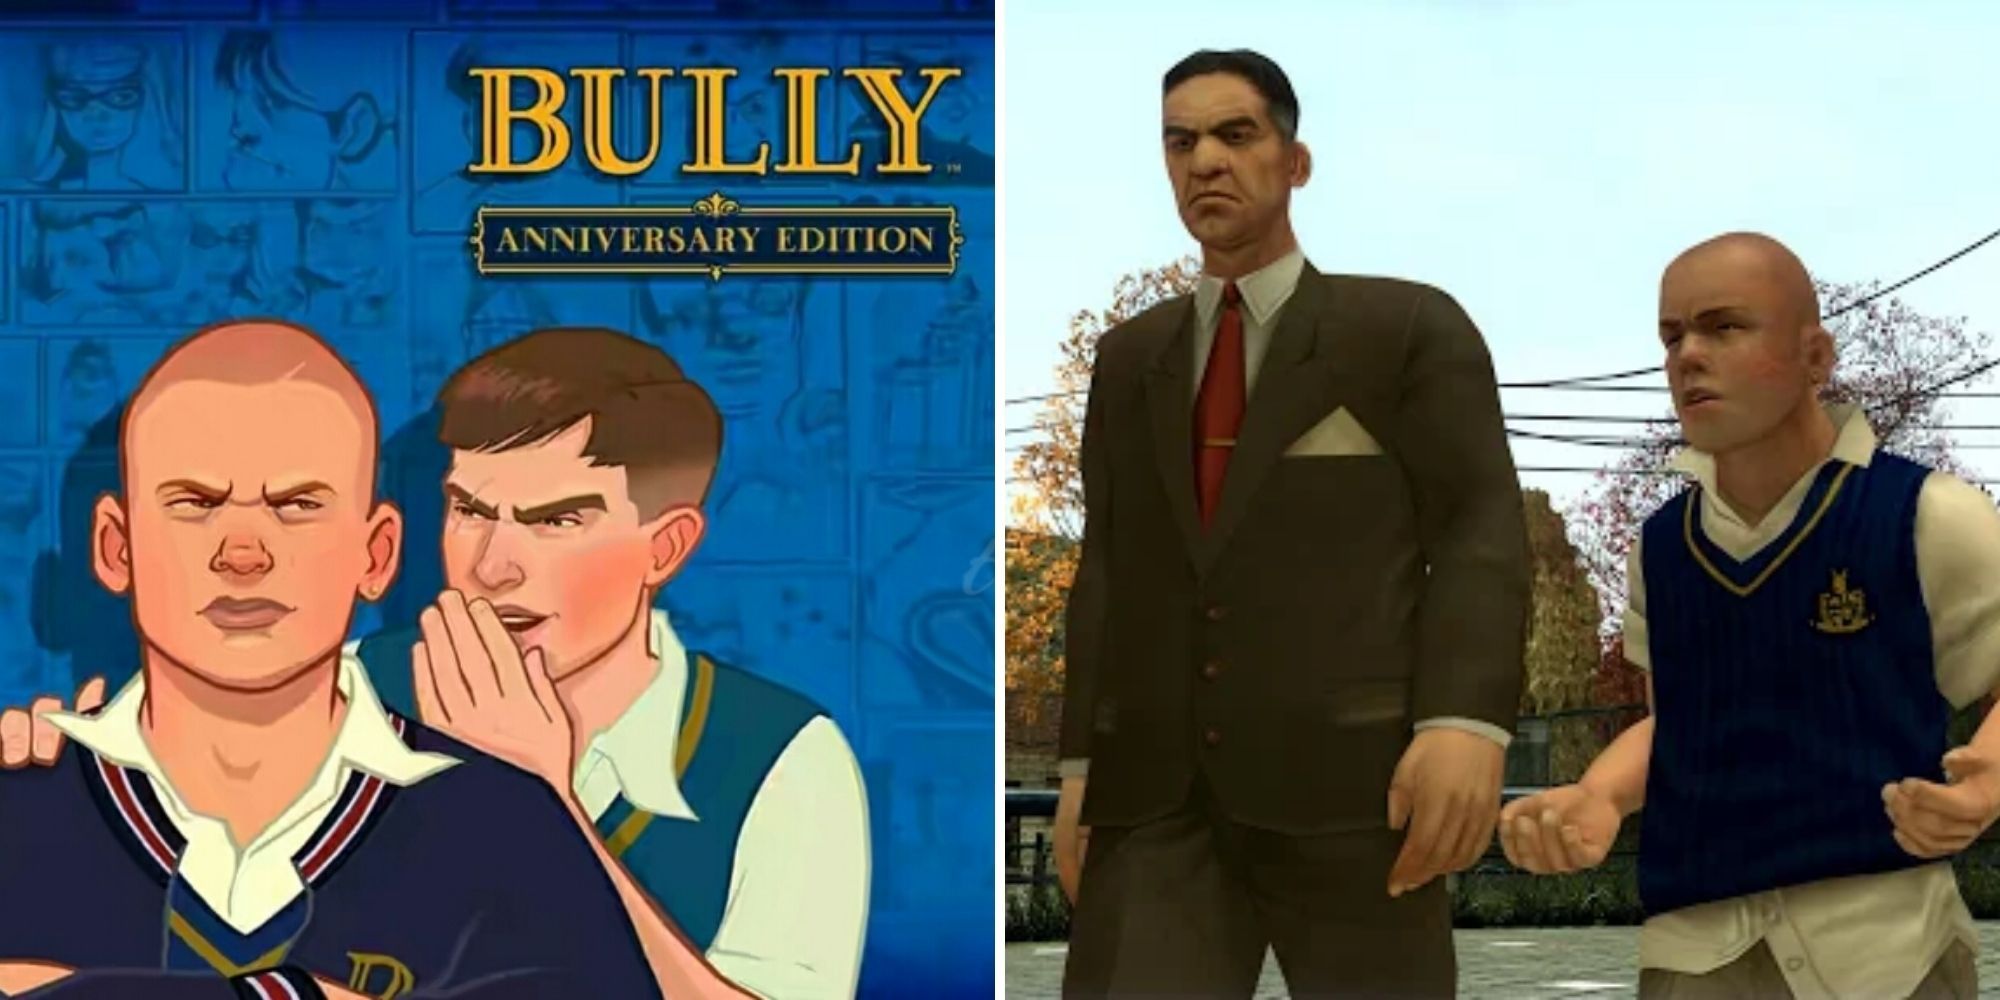 Bully Anniversary Edition Showing Loading Image and Jimmy with the Principal